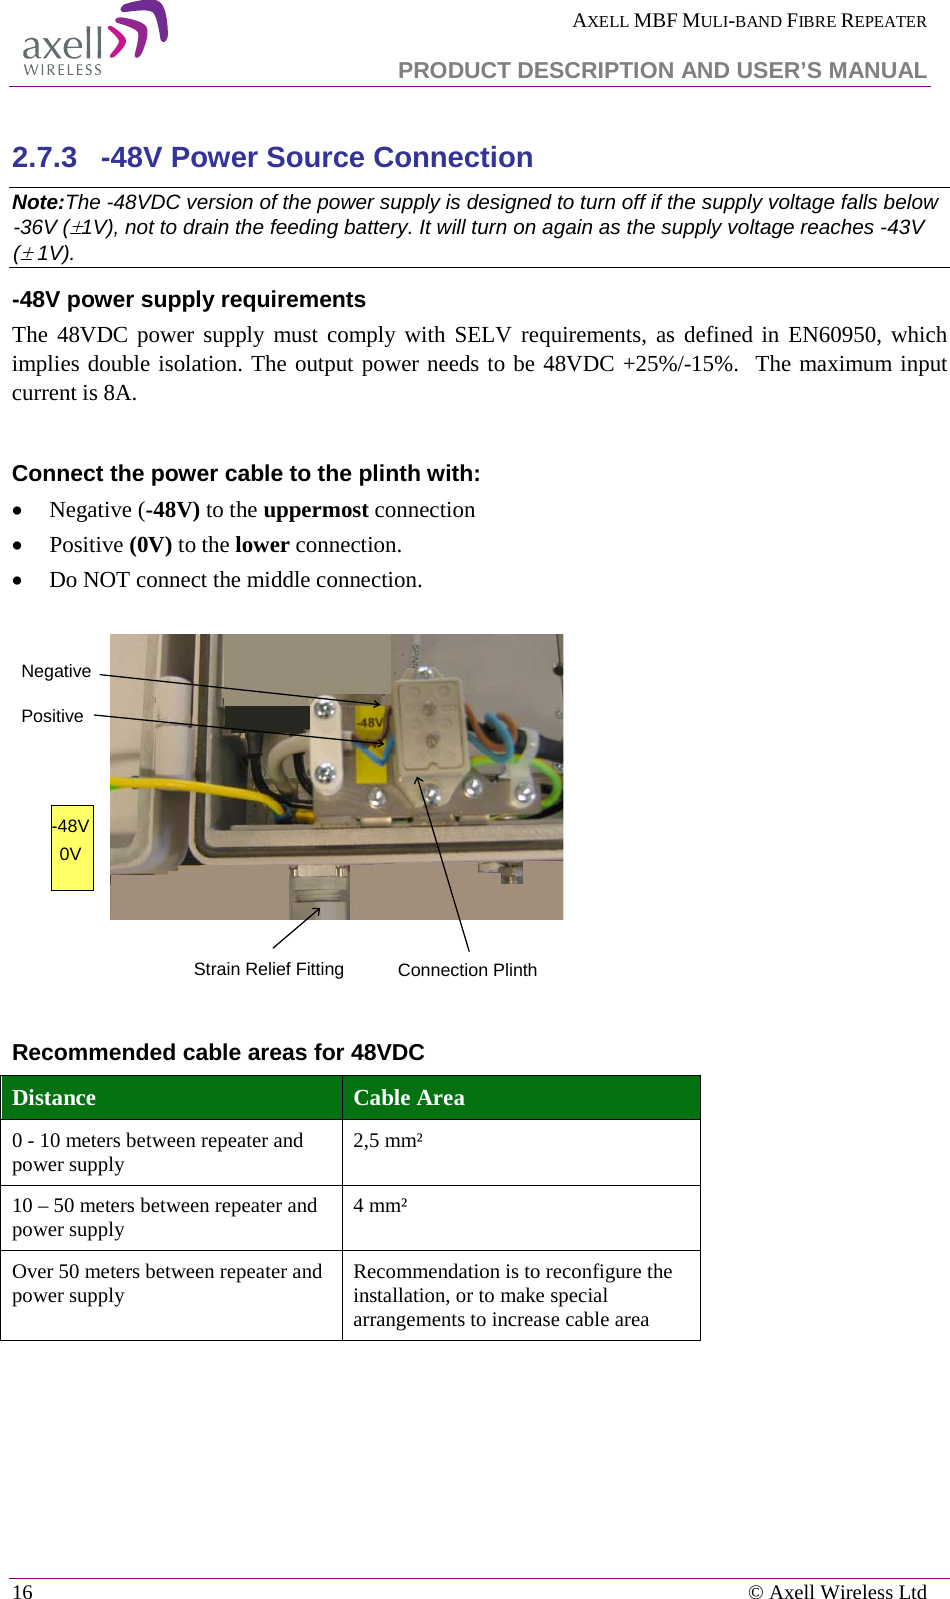  AXELL MBF MULI-BAND FIBRE REPEATER   PRODUCT DESCRIPTION AND USER’S MANUAL 16    © Axell Wireless Ltd  2.7.3  -48V Power Source Connection Note:The -48VDC version of the power supply is designed to turn off if the supply voltage falls below -36V (±1V), not to drain the feeding battery. It will turn on again as the supply voltage reaches -43V (± 1V). -48V power supply requirements The 48VDC power supply must comply with SELV requirements, as defined in EN60950, which implies double isolation. The output power needs to be 48VDC +25%/-15%.  The maximum input current is 8A.  Connect the power cable to the plinth with: • Negative (-48V) to the uppermost connection • Positive (0V) to the lower connection. • Do NOT connect the middle connection.    Recommended cable areas for 48VDC Distance Cable Area 0 - 10 meters between repeater and power supply 2,5 mm² 10 – 50 meters between repeater and power supply 4 mm² Over 50 meters between repeater and power supply Recommendation is to reconfigure the installation, or to make special arrangements to increase cable area     Connection PlinthNegativePositive-48V0VStrain Relief Fitting